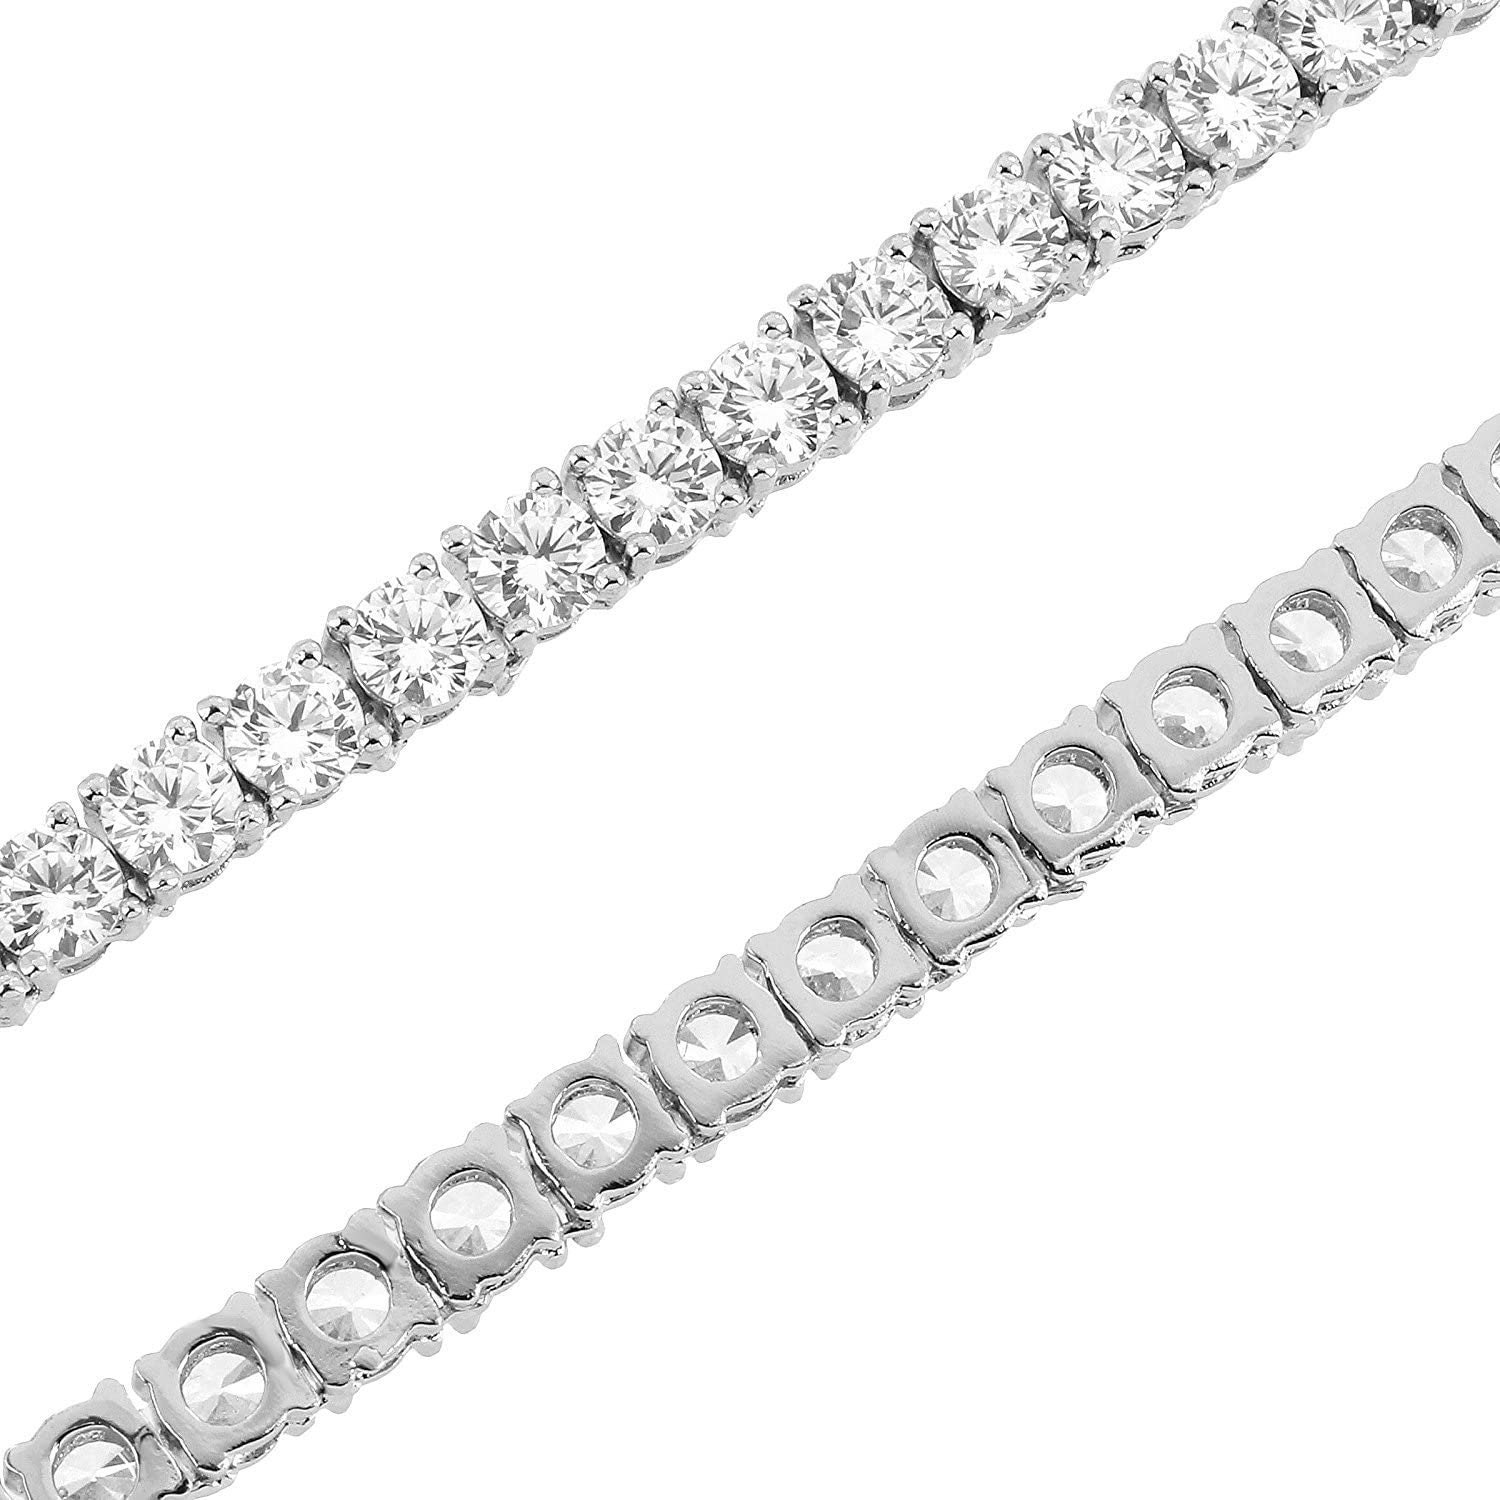 4mm 1 Row Real 925 Sterling Silver Iced Tennis Chain Necklace ANTI TARNISH 